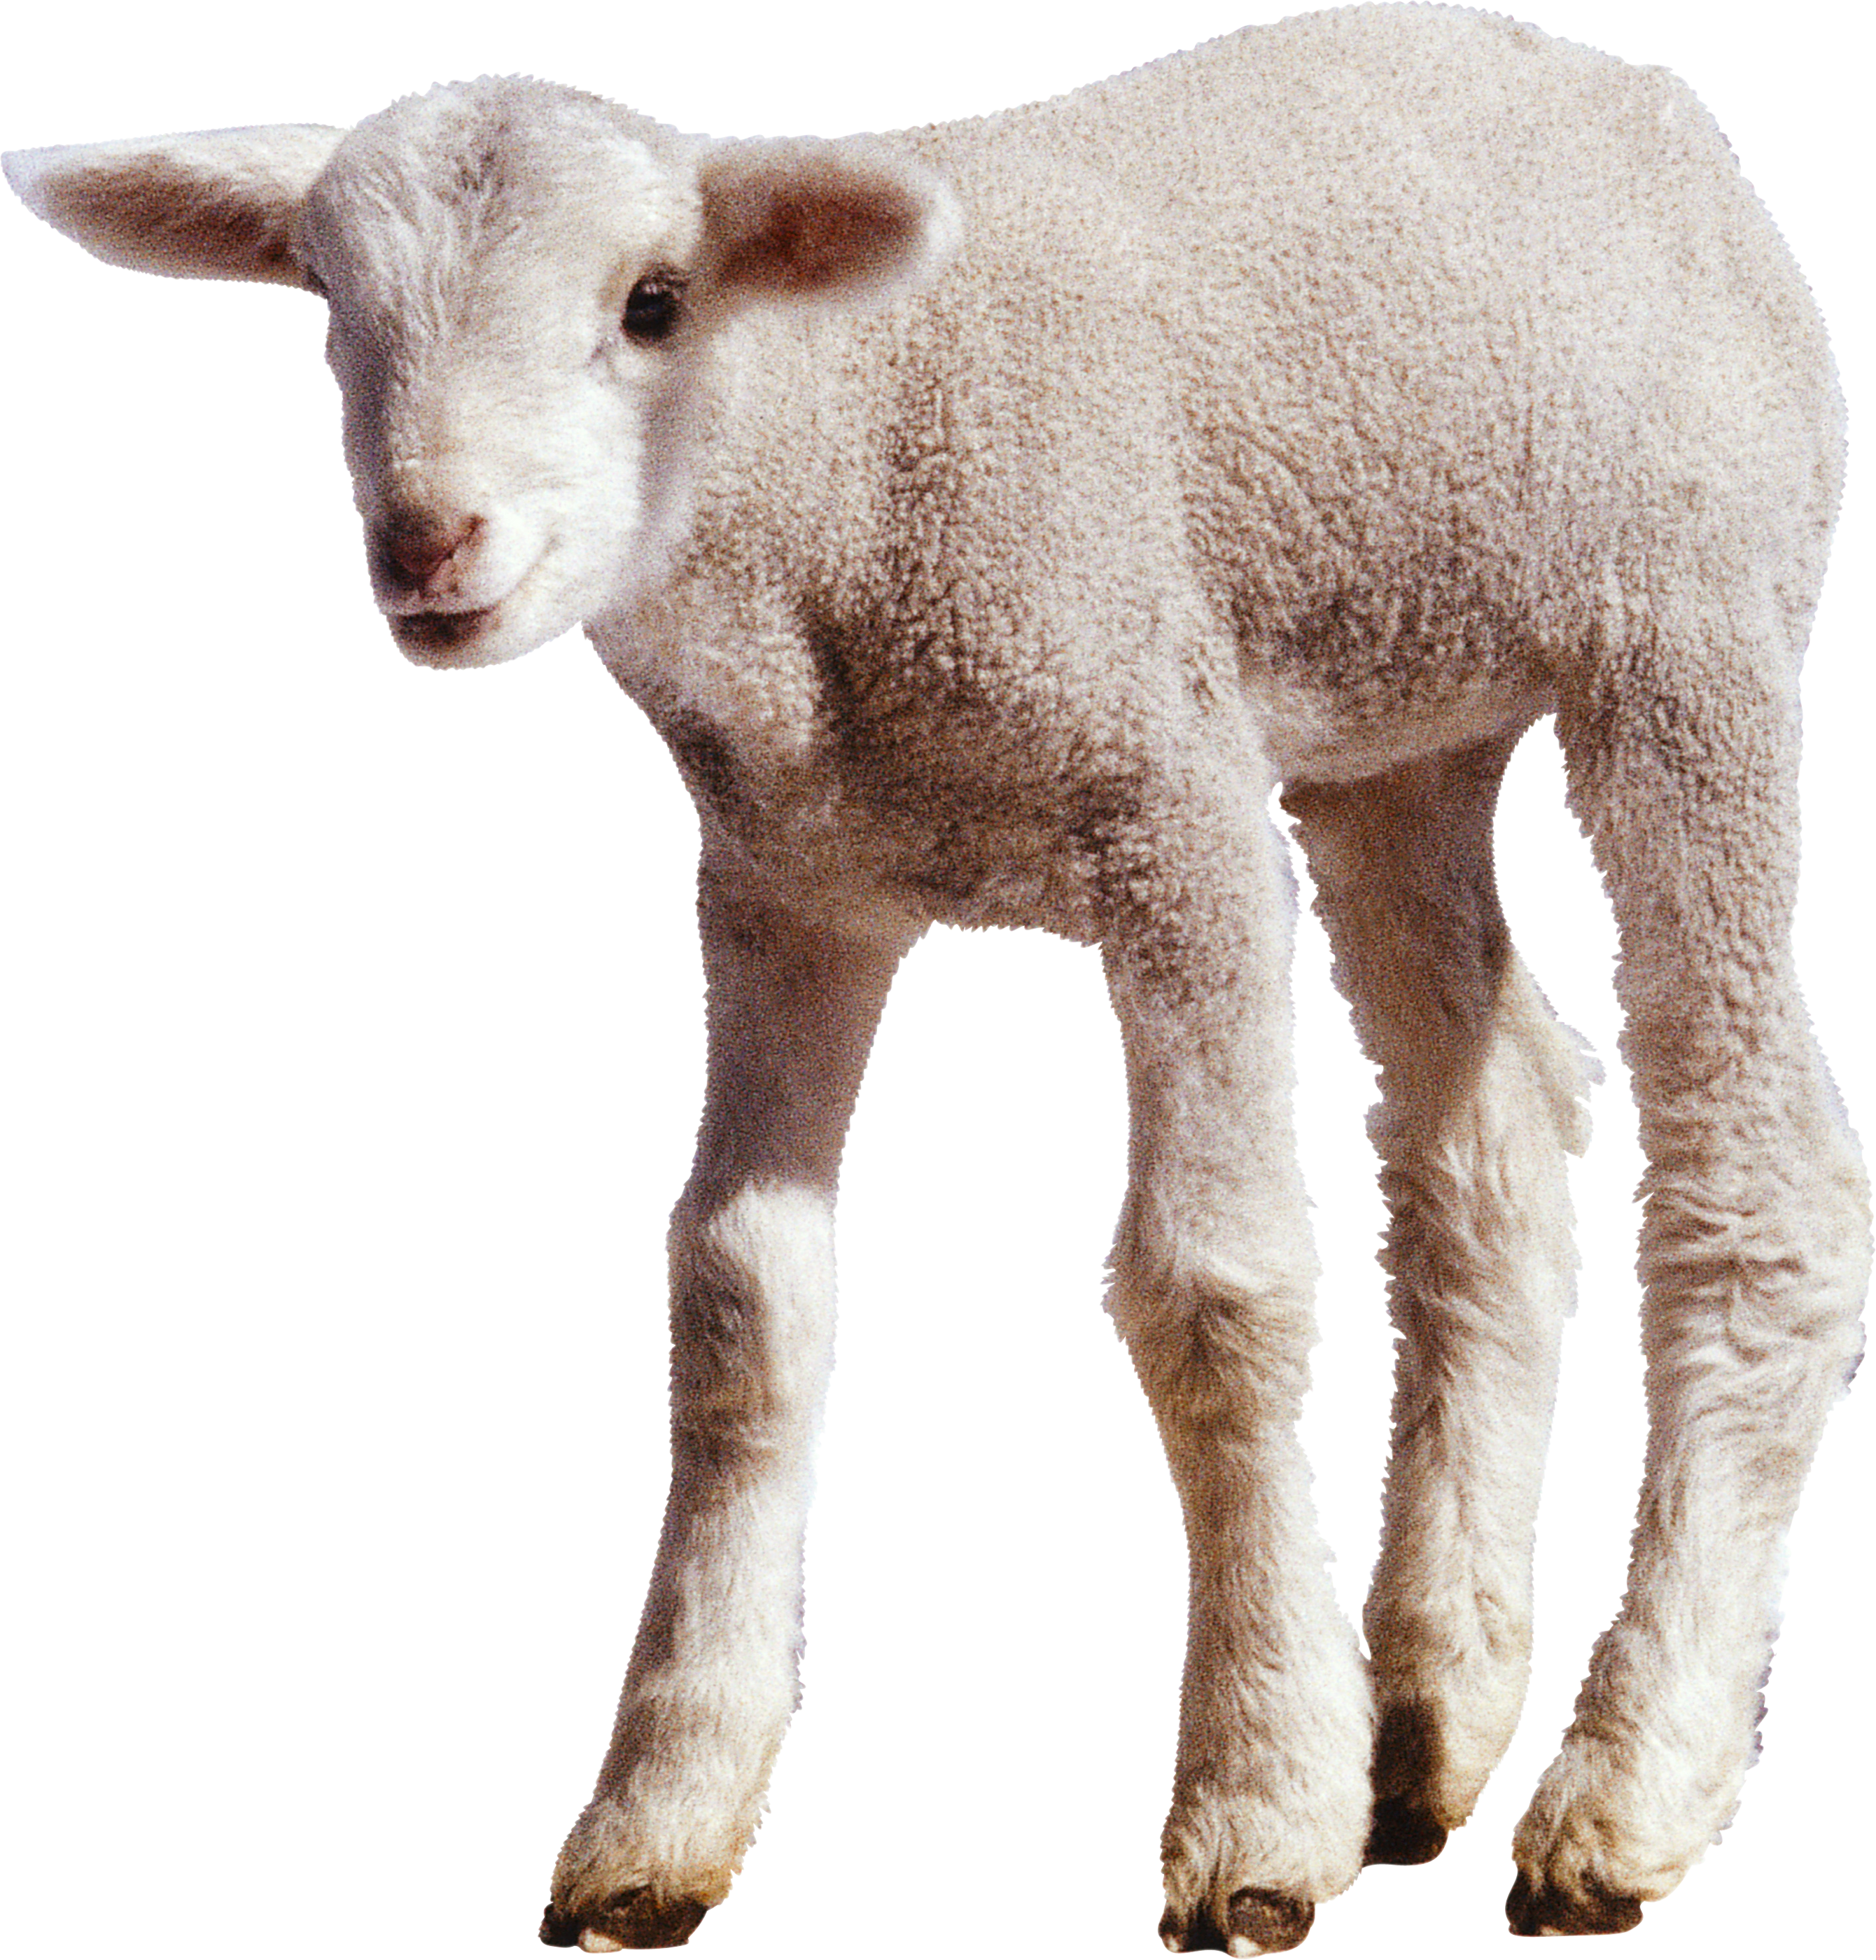 sheep clipart clear background